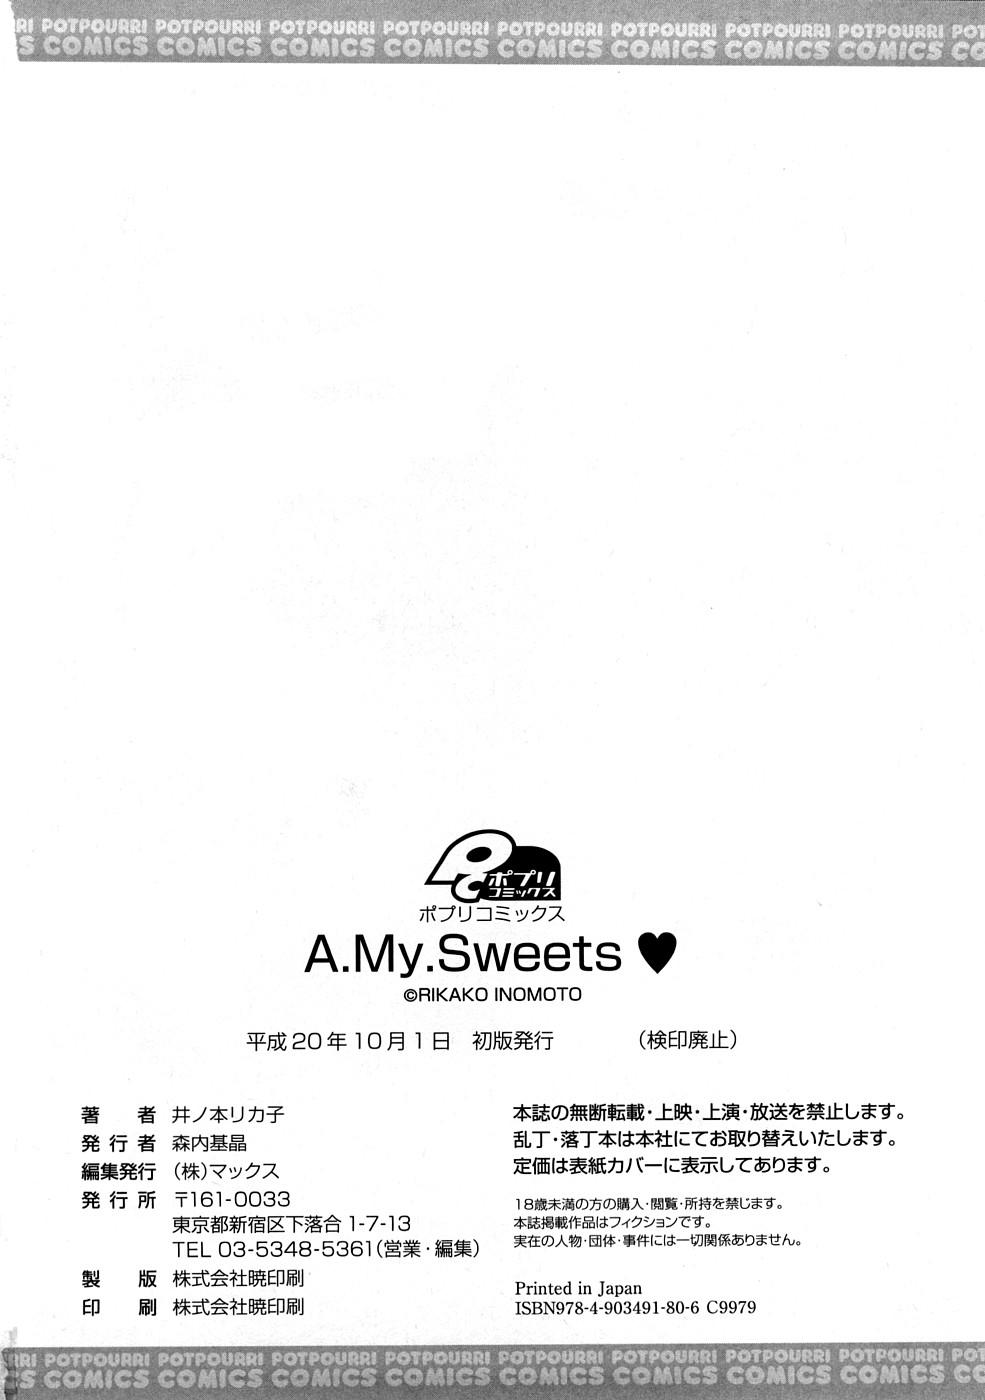 A.My.Sweets 200